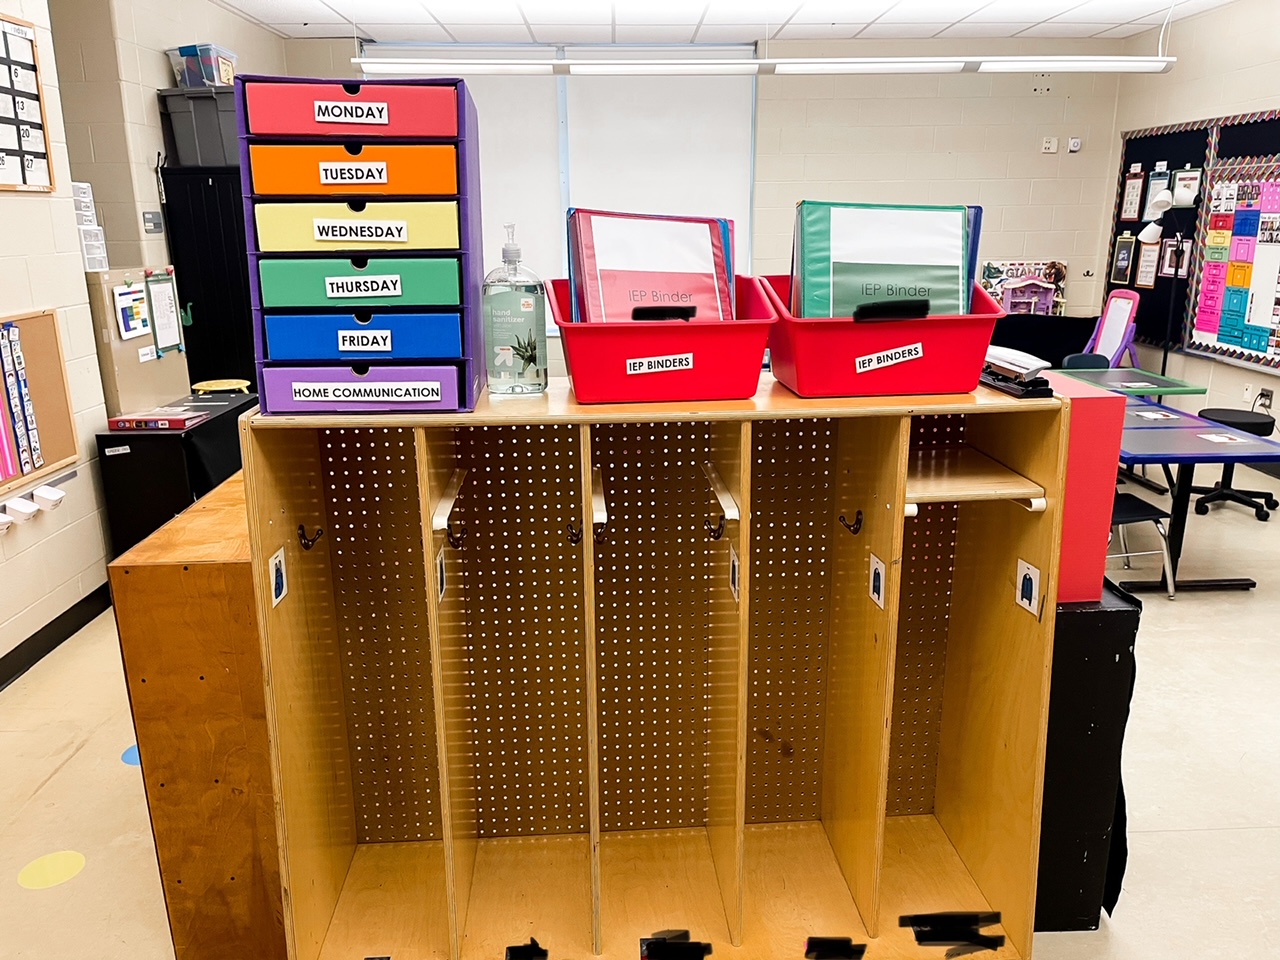 classroom mailbox and bins to organize daily materials